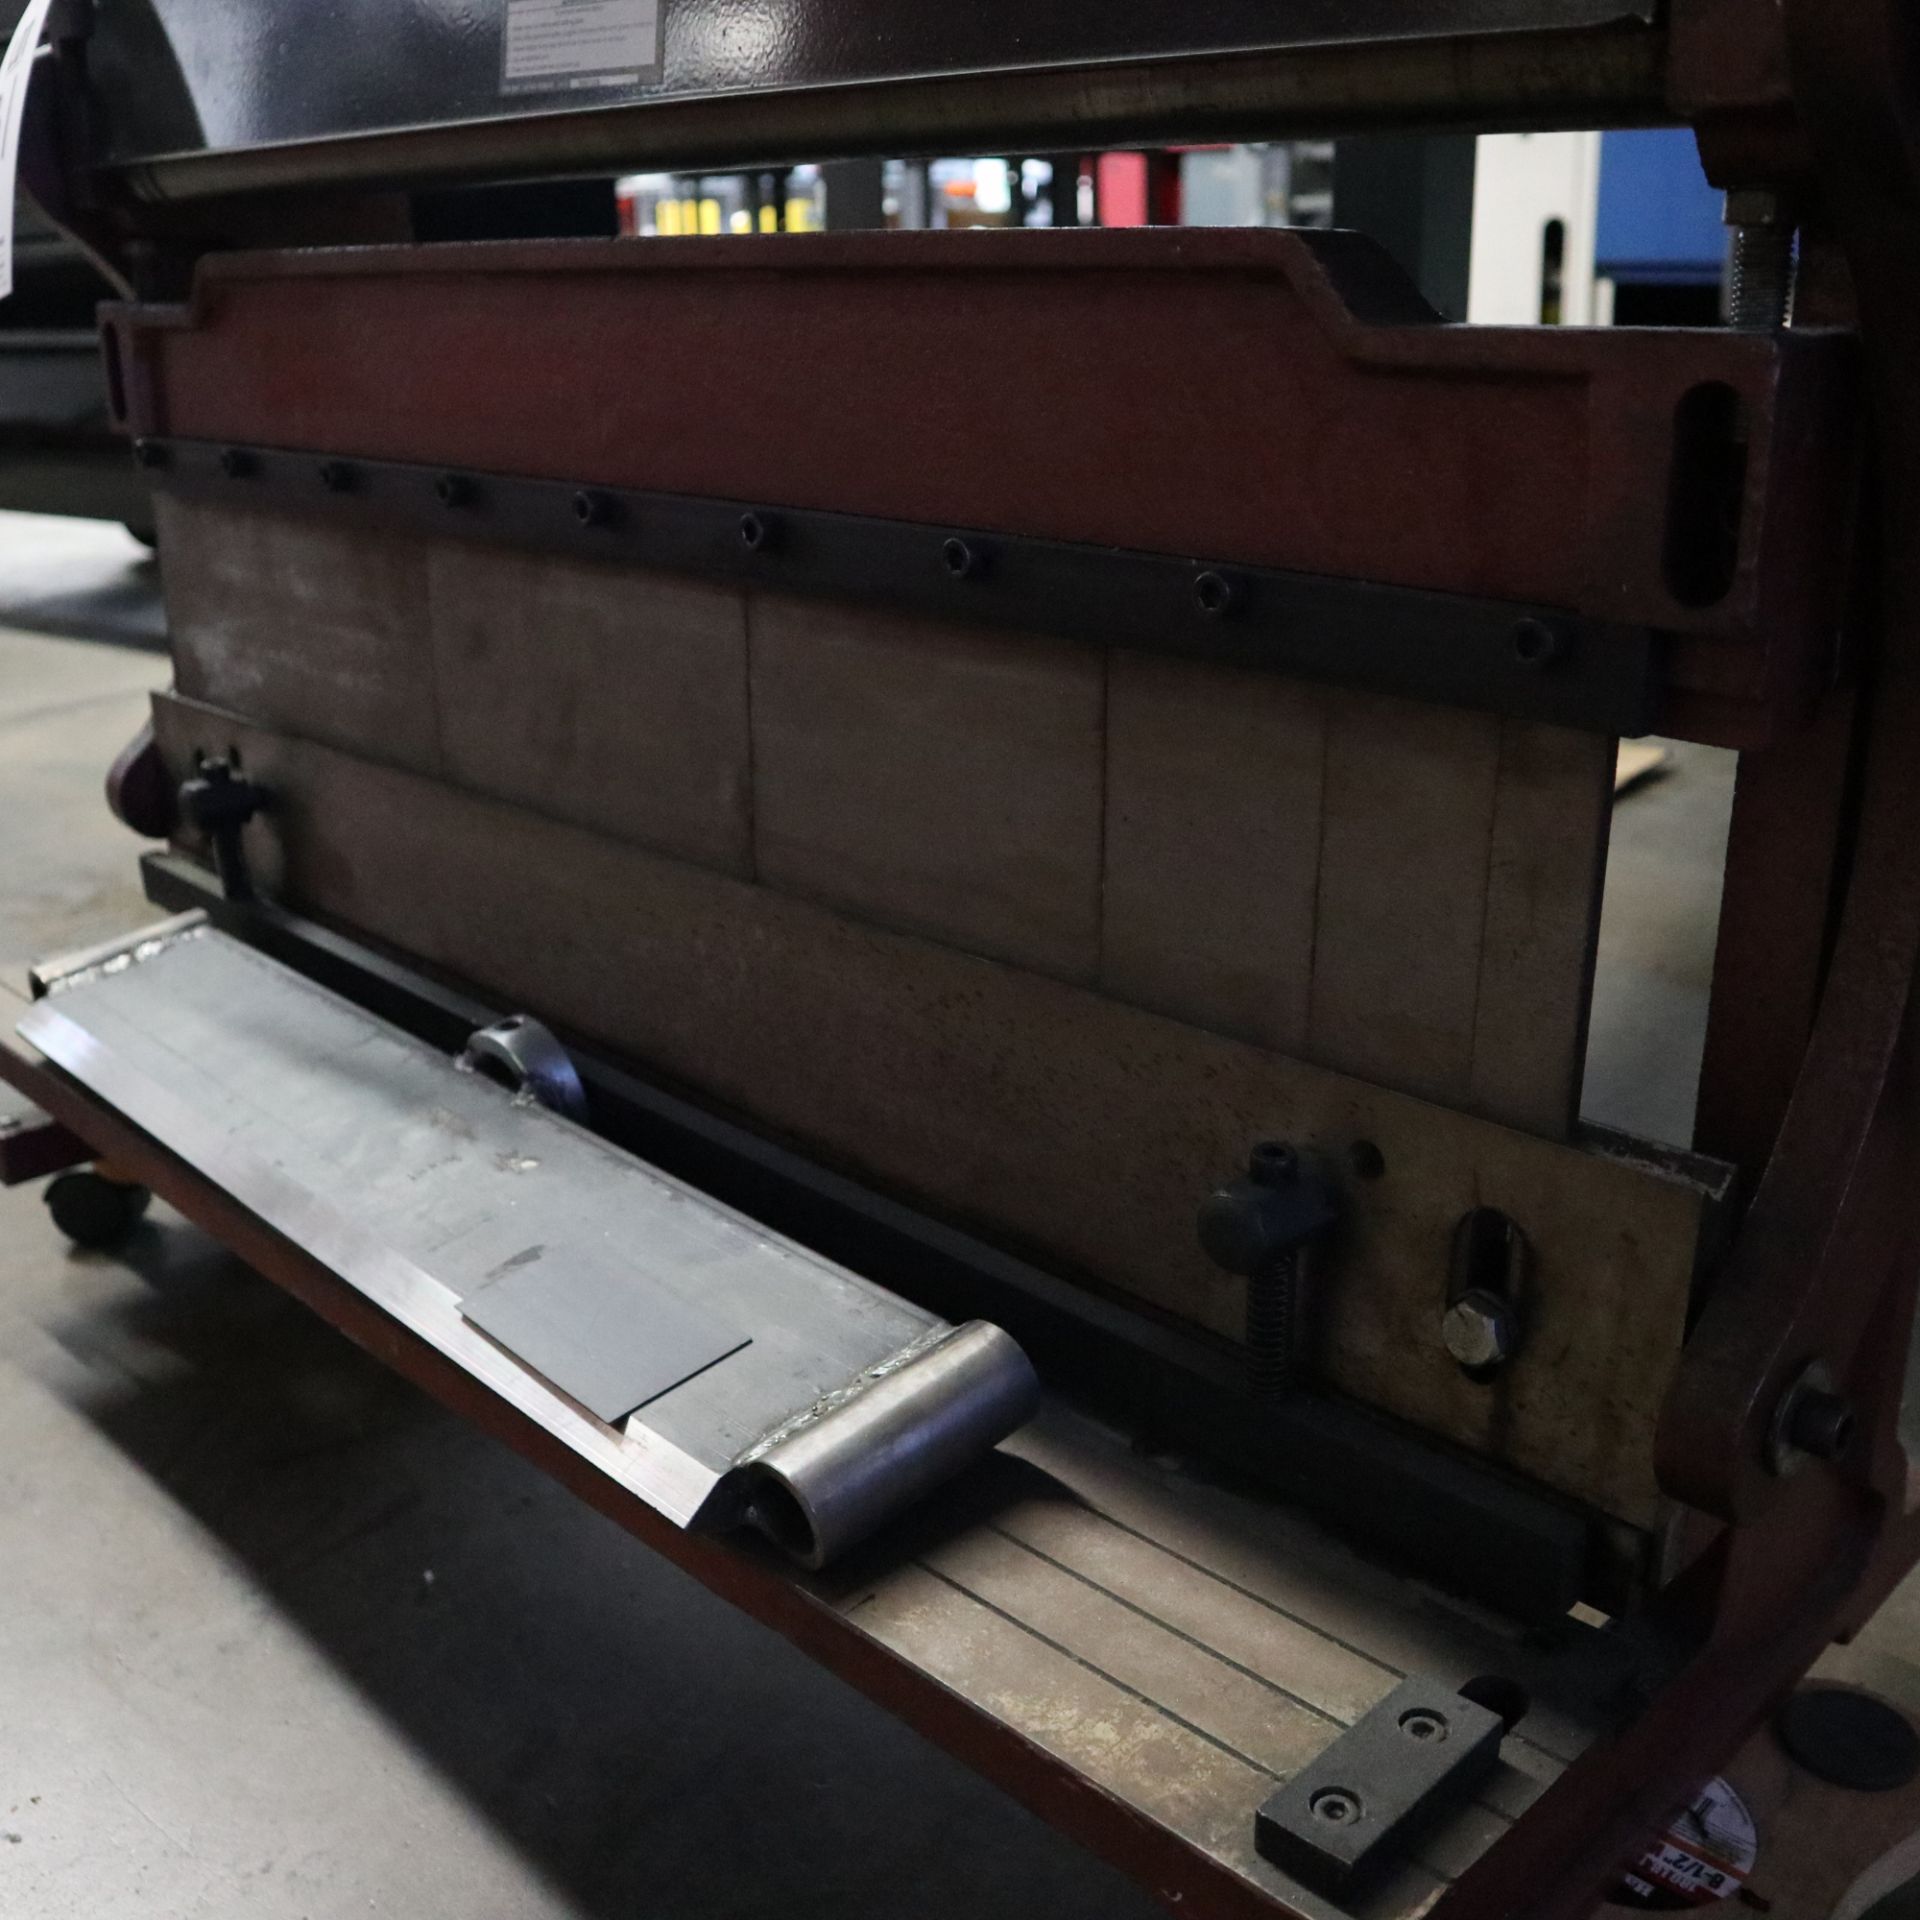 CENTRAL MACHINERY 30" SHEAR AND PRESS BRAKE, 30" WIDTH, 1", 2", 3", 6", 8", 10" DIES - Image 3 of 3